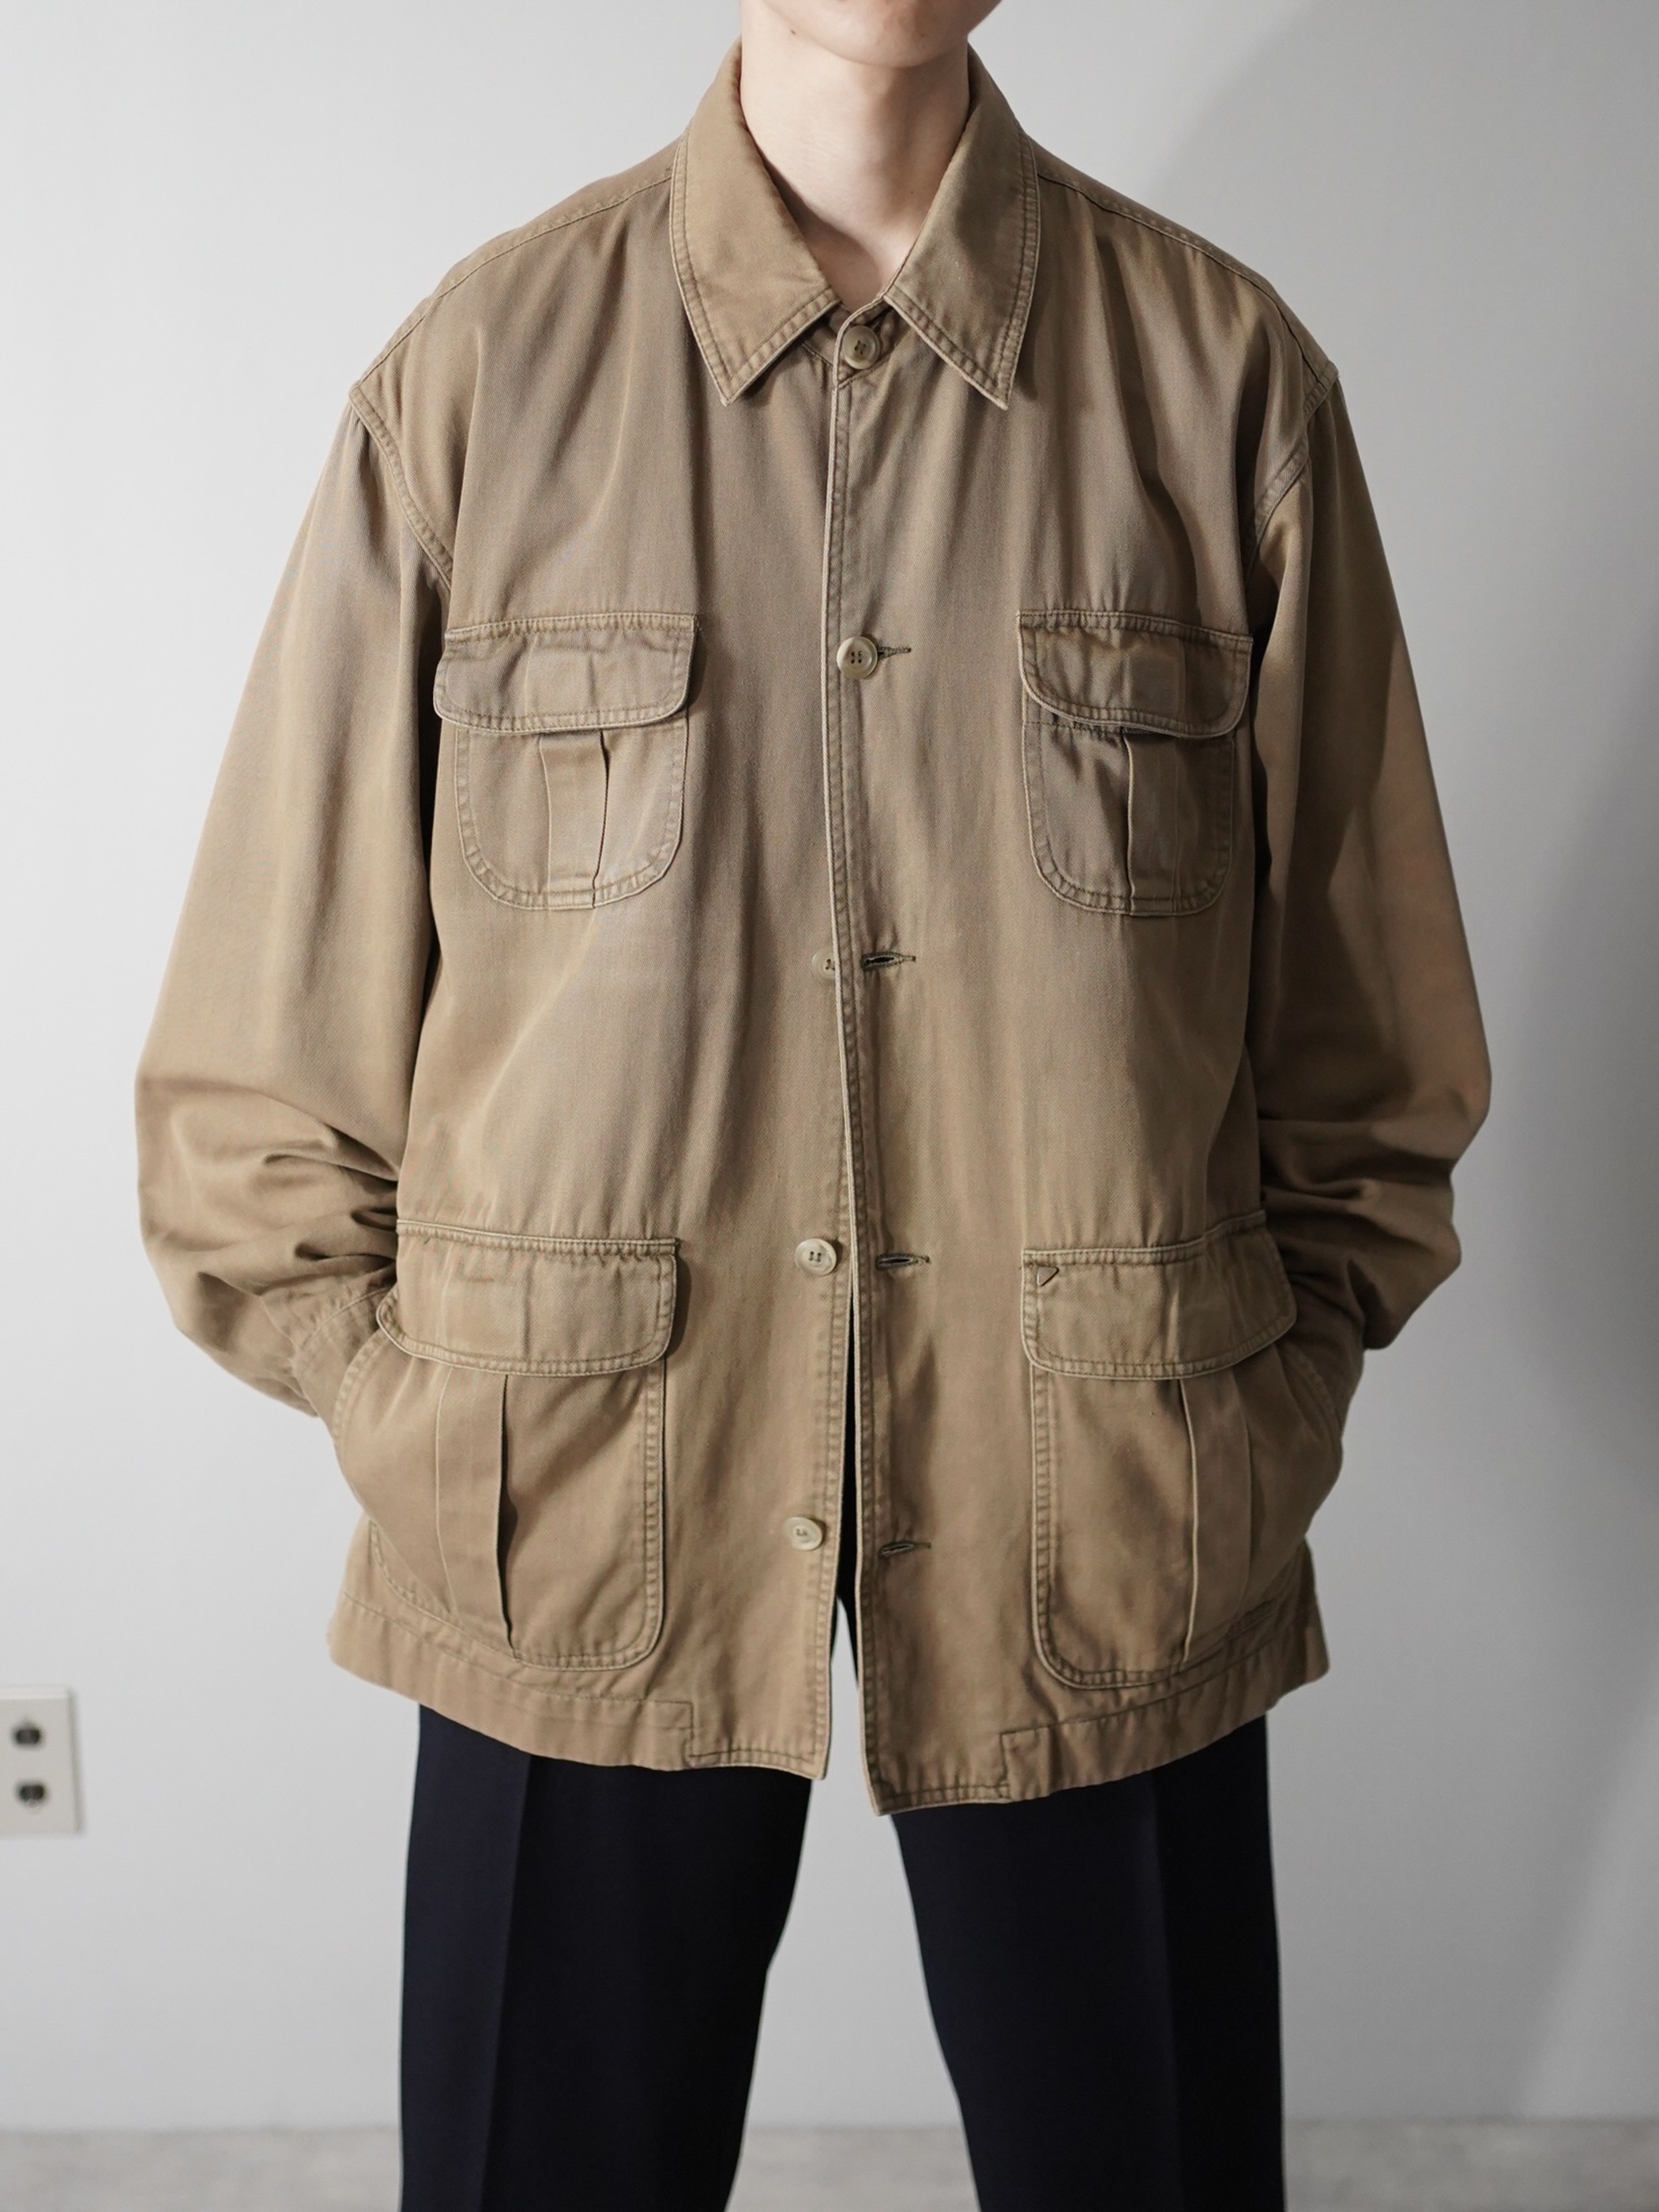 1990's MTAPRO cotton cover all jacket